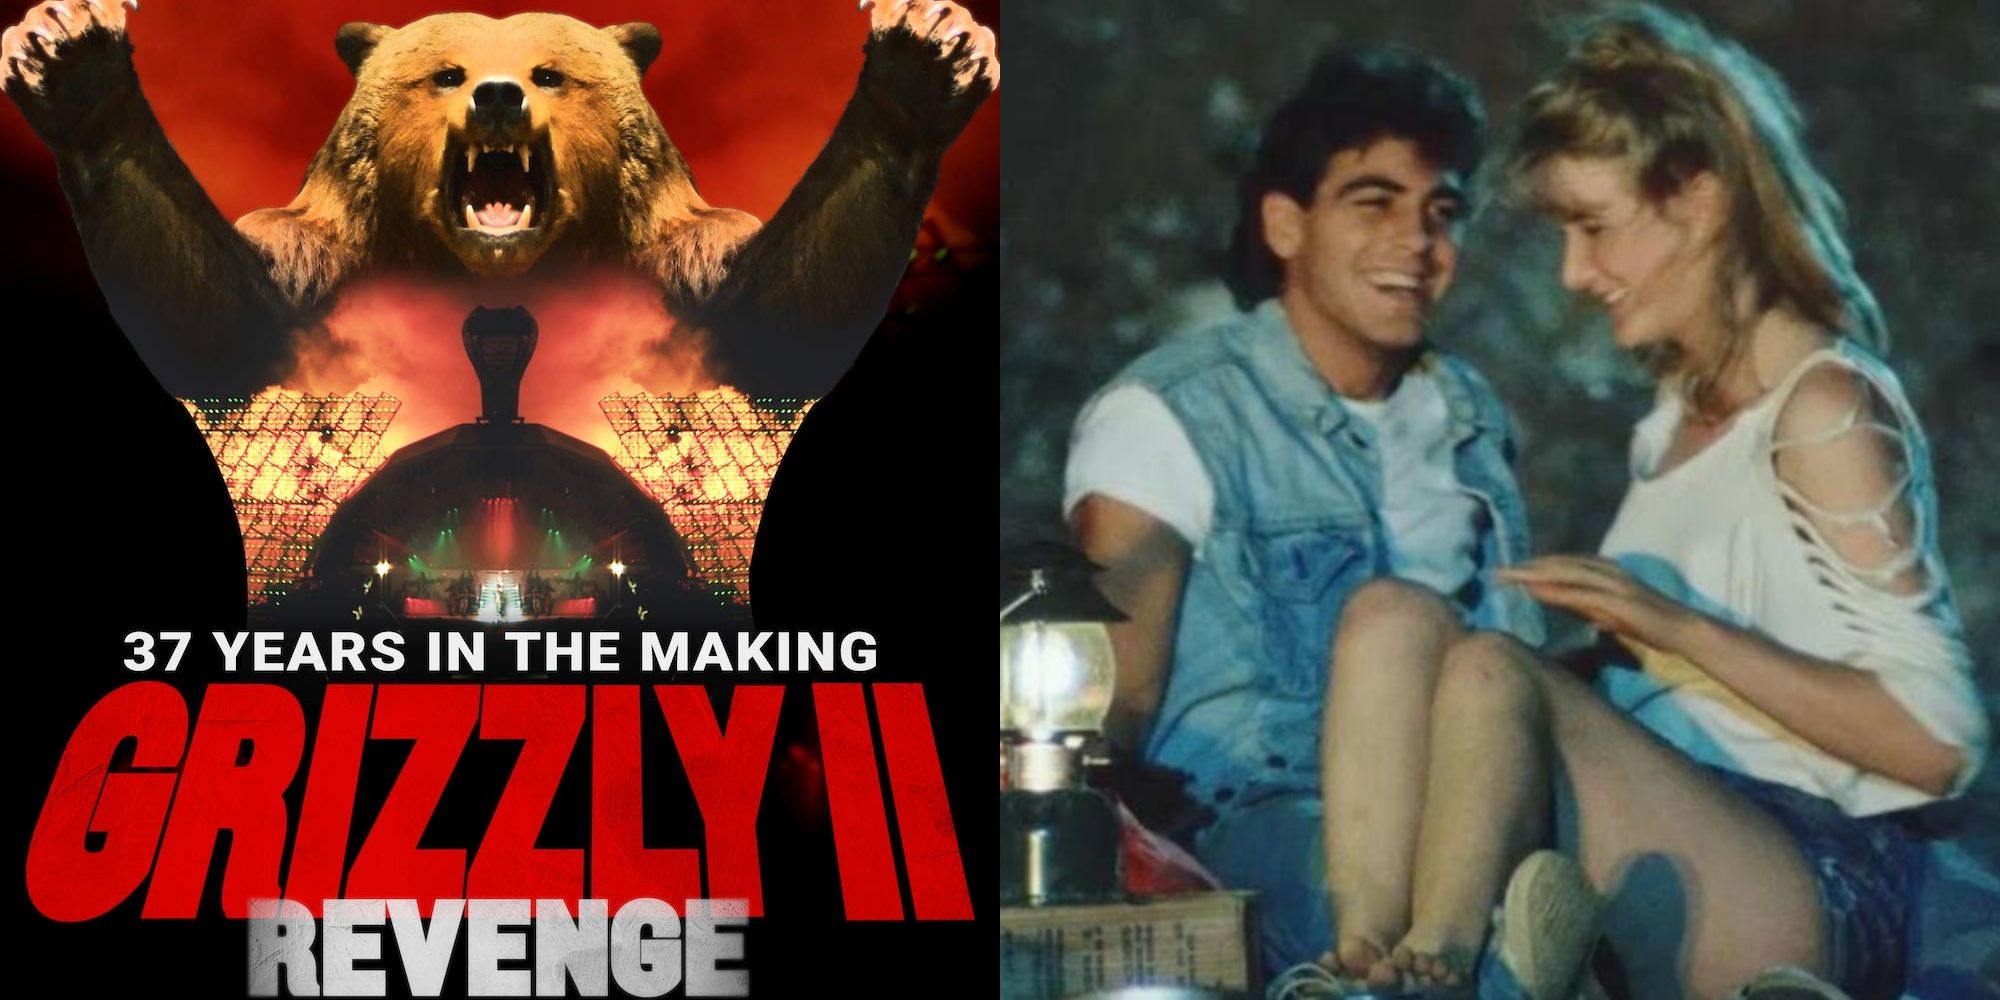 Split image showing the Poster for Grizzly II Revenge and George Clooney and Laura Dern in the movie.